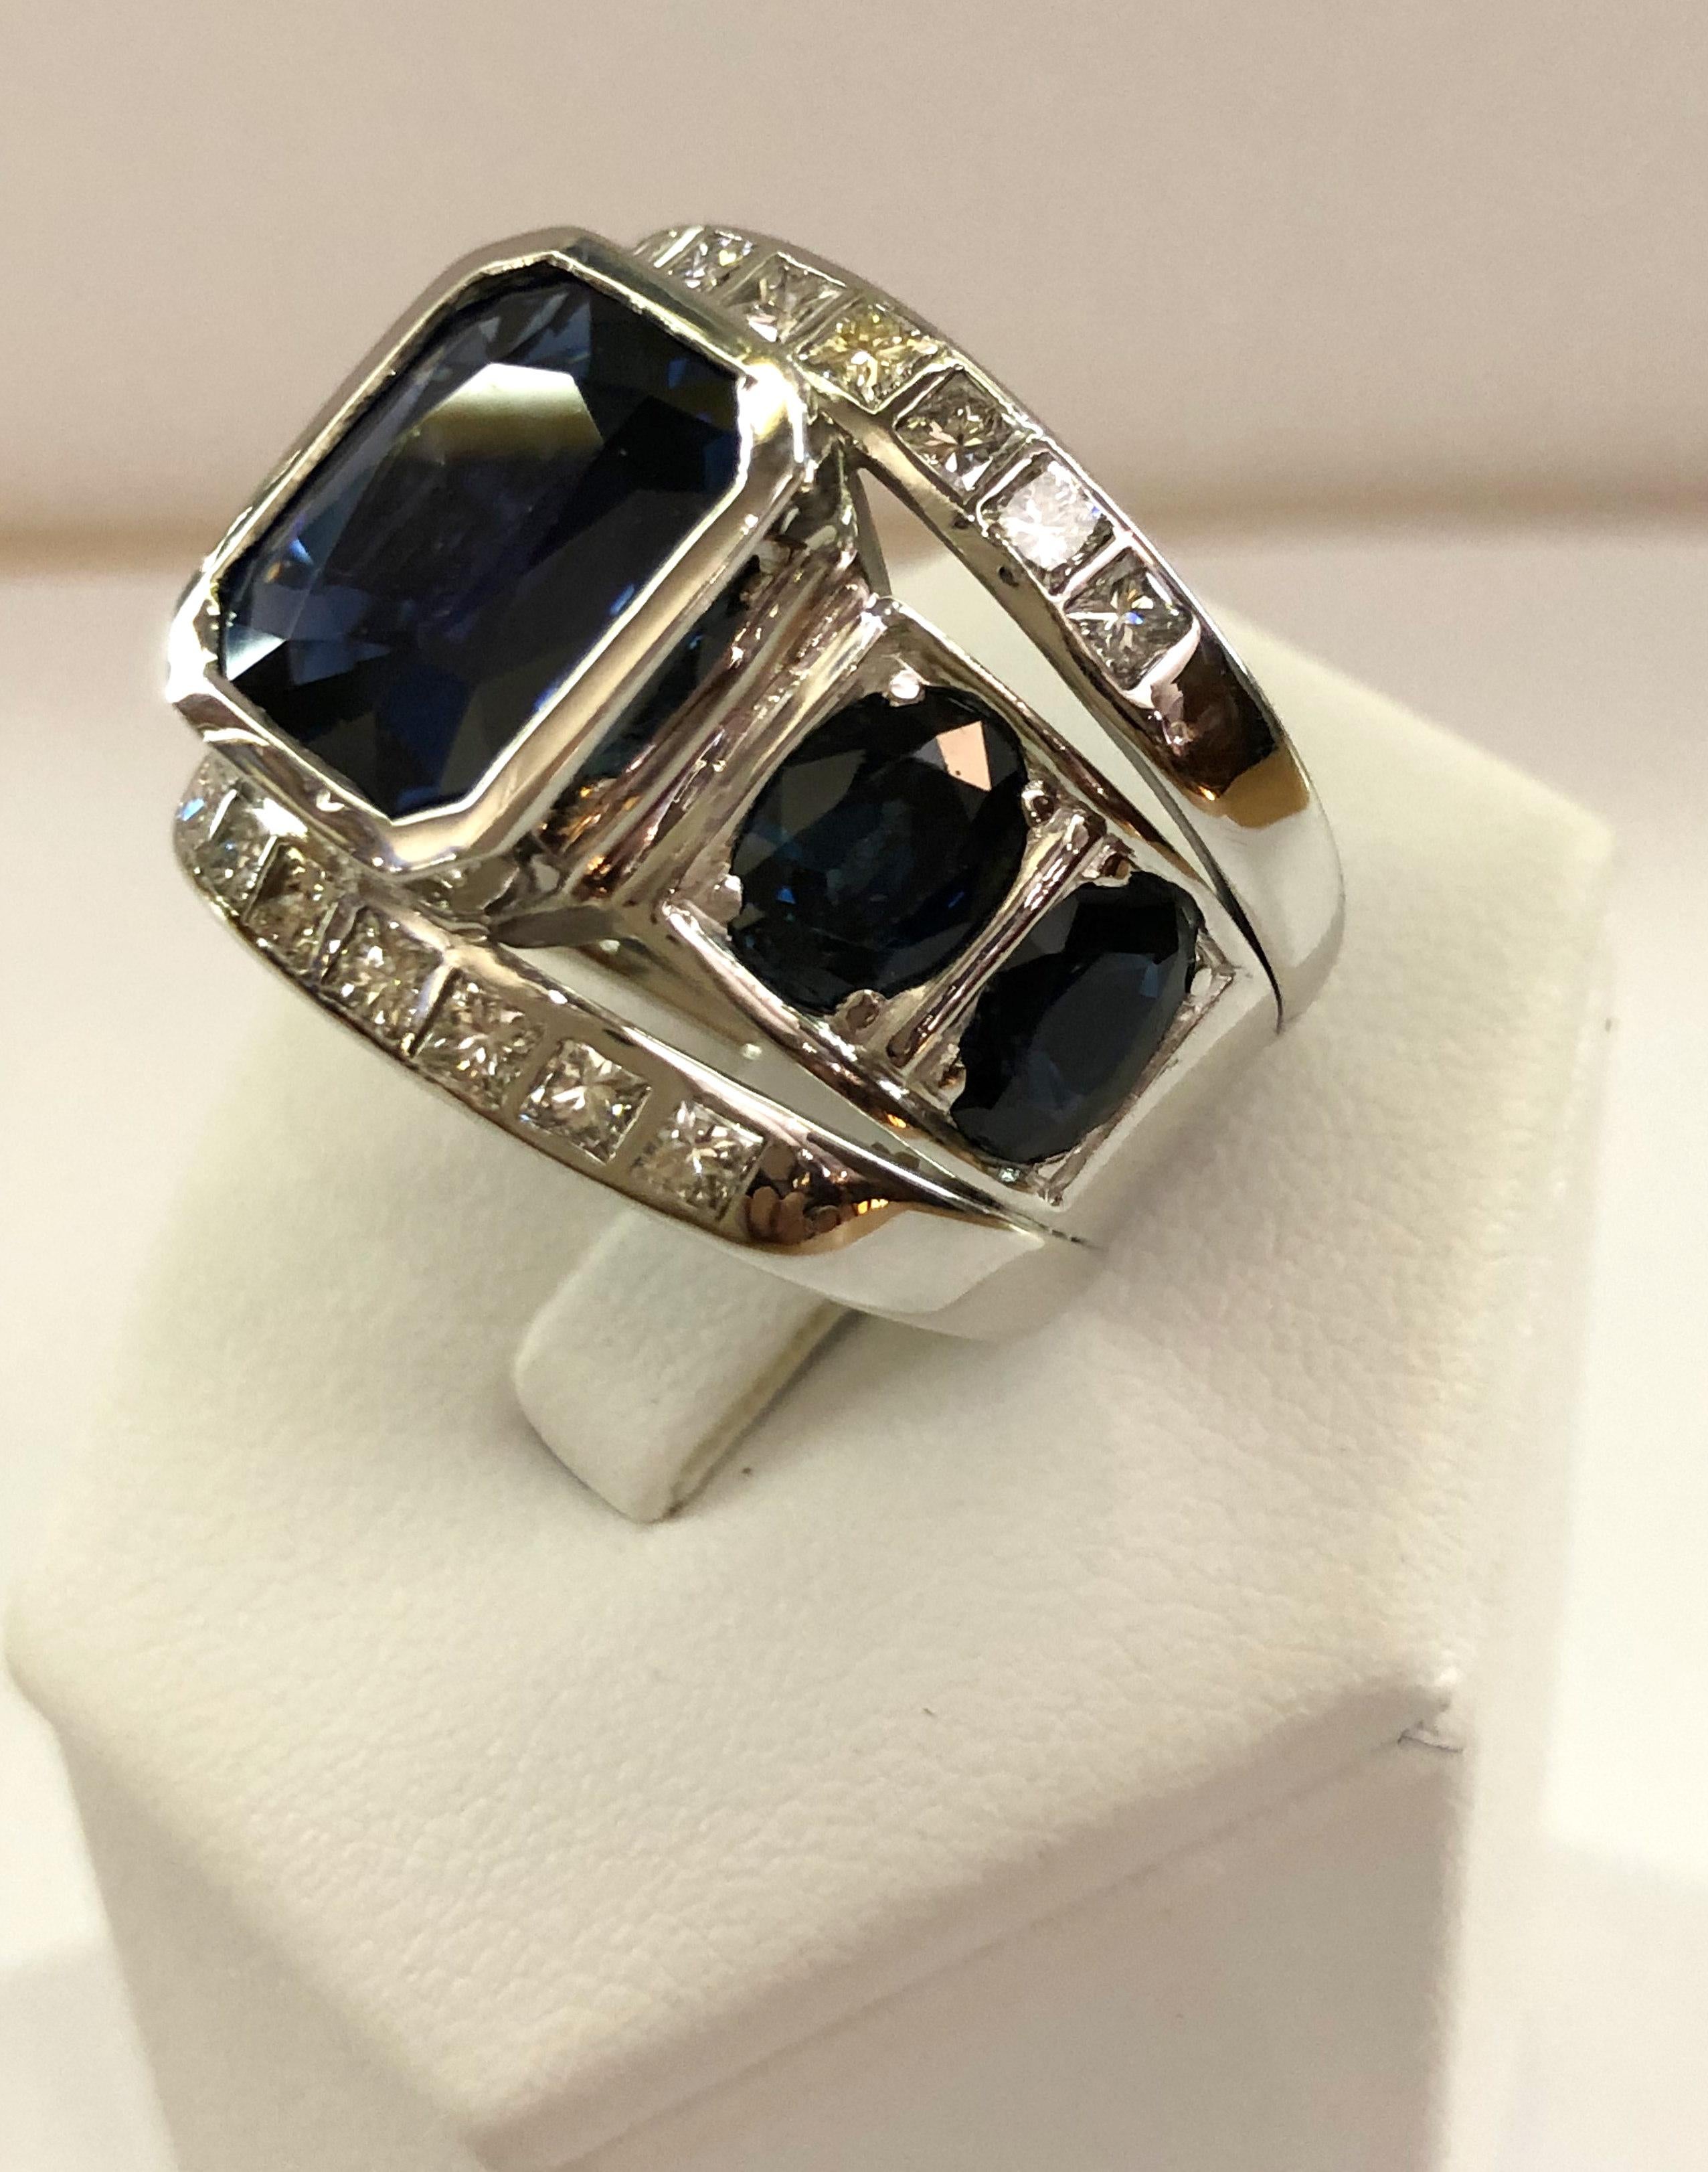 Vintage 18 karat white gold band ring, with blue sapphires for a total of 8.5 karats, and double rows of brilliant diamonds, Italy 1960s
Ring size US 6